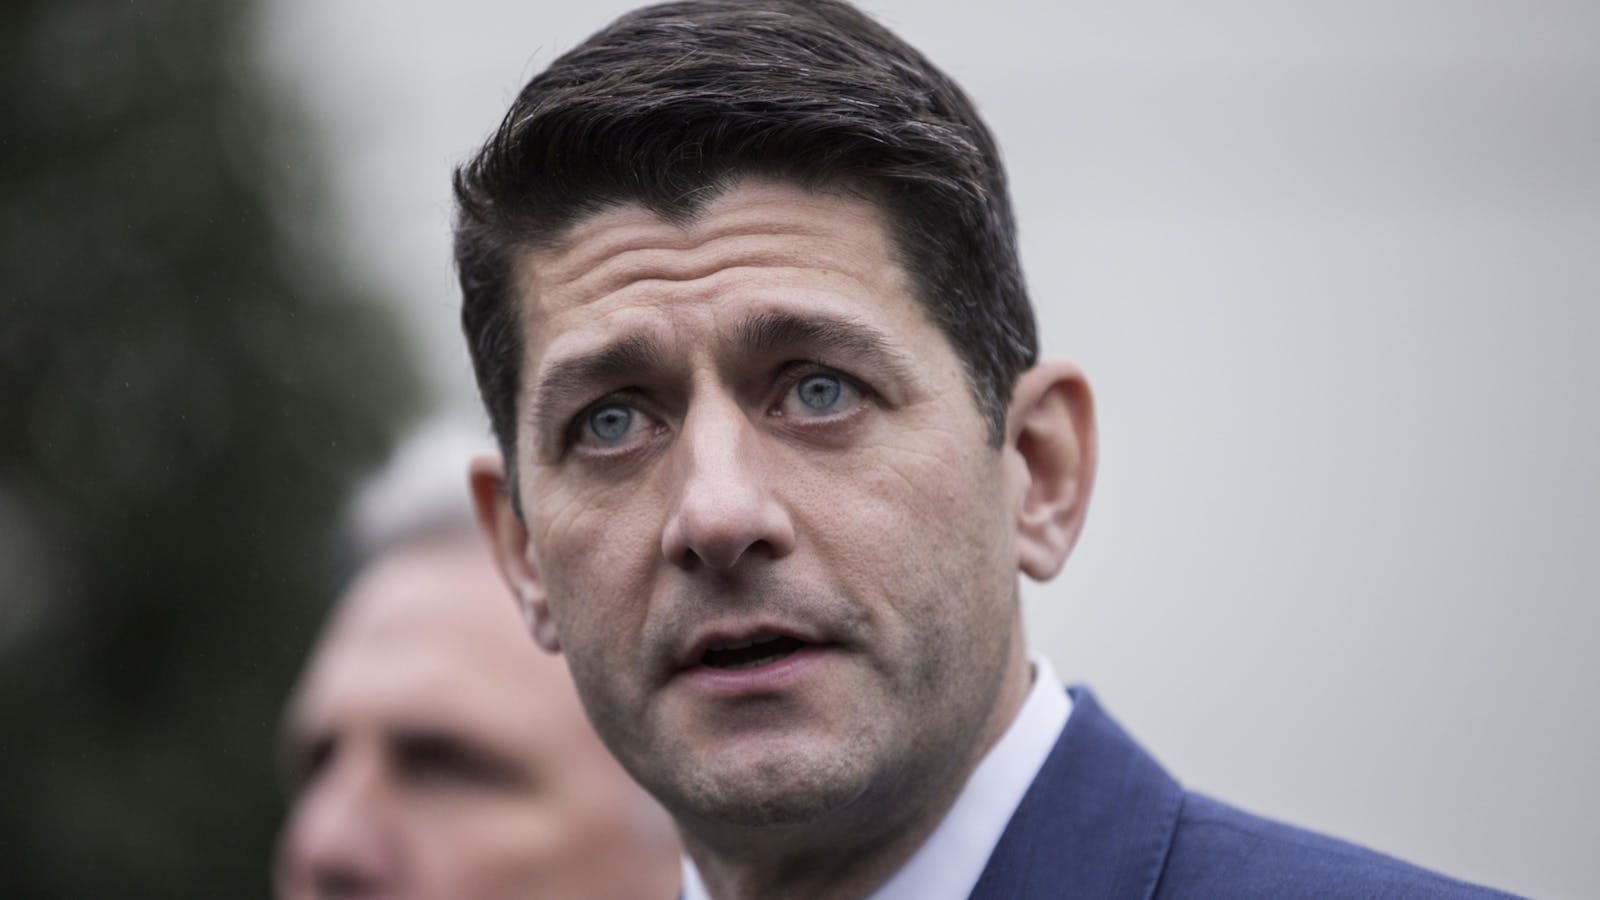 Former politician Paul Ryan. Photo by Bloomberg